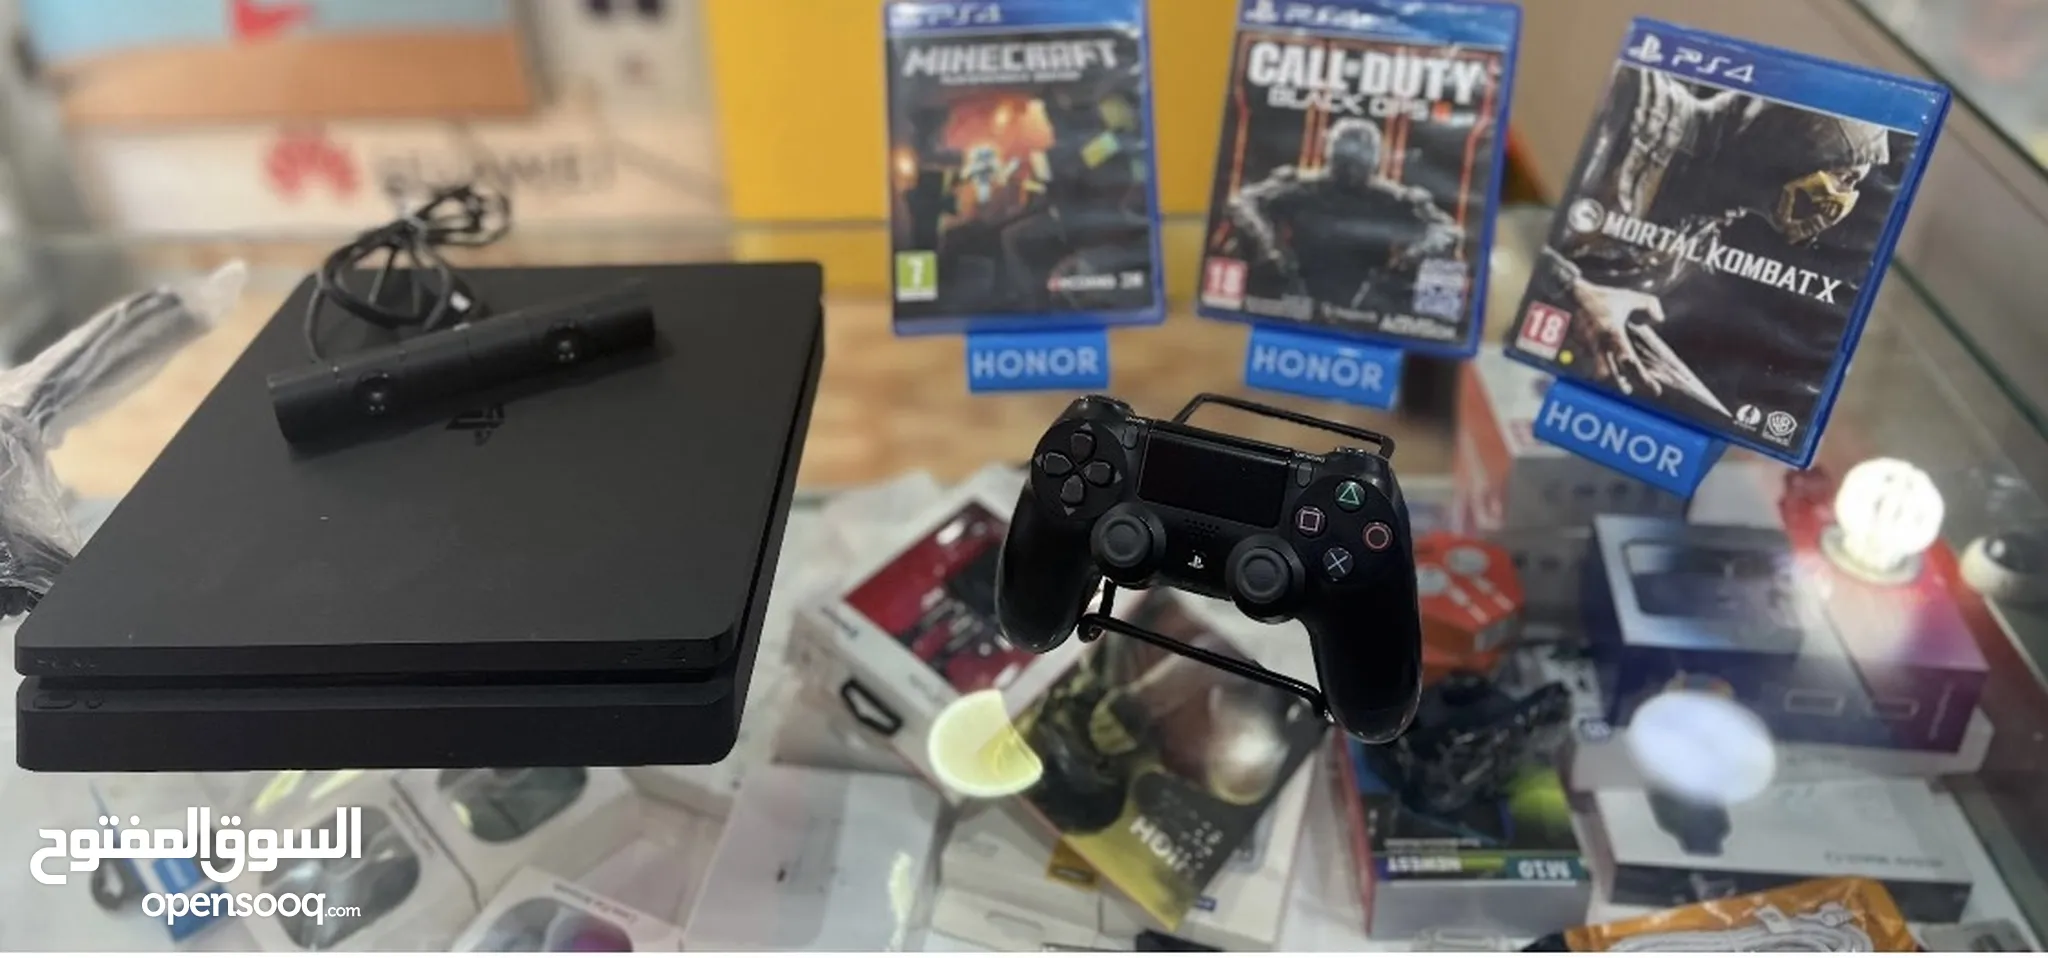 Playstation 4 For Sale in Lebanon : Used : Best Prices | OpenSooq